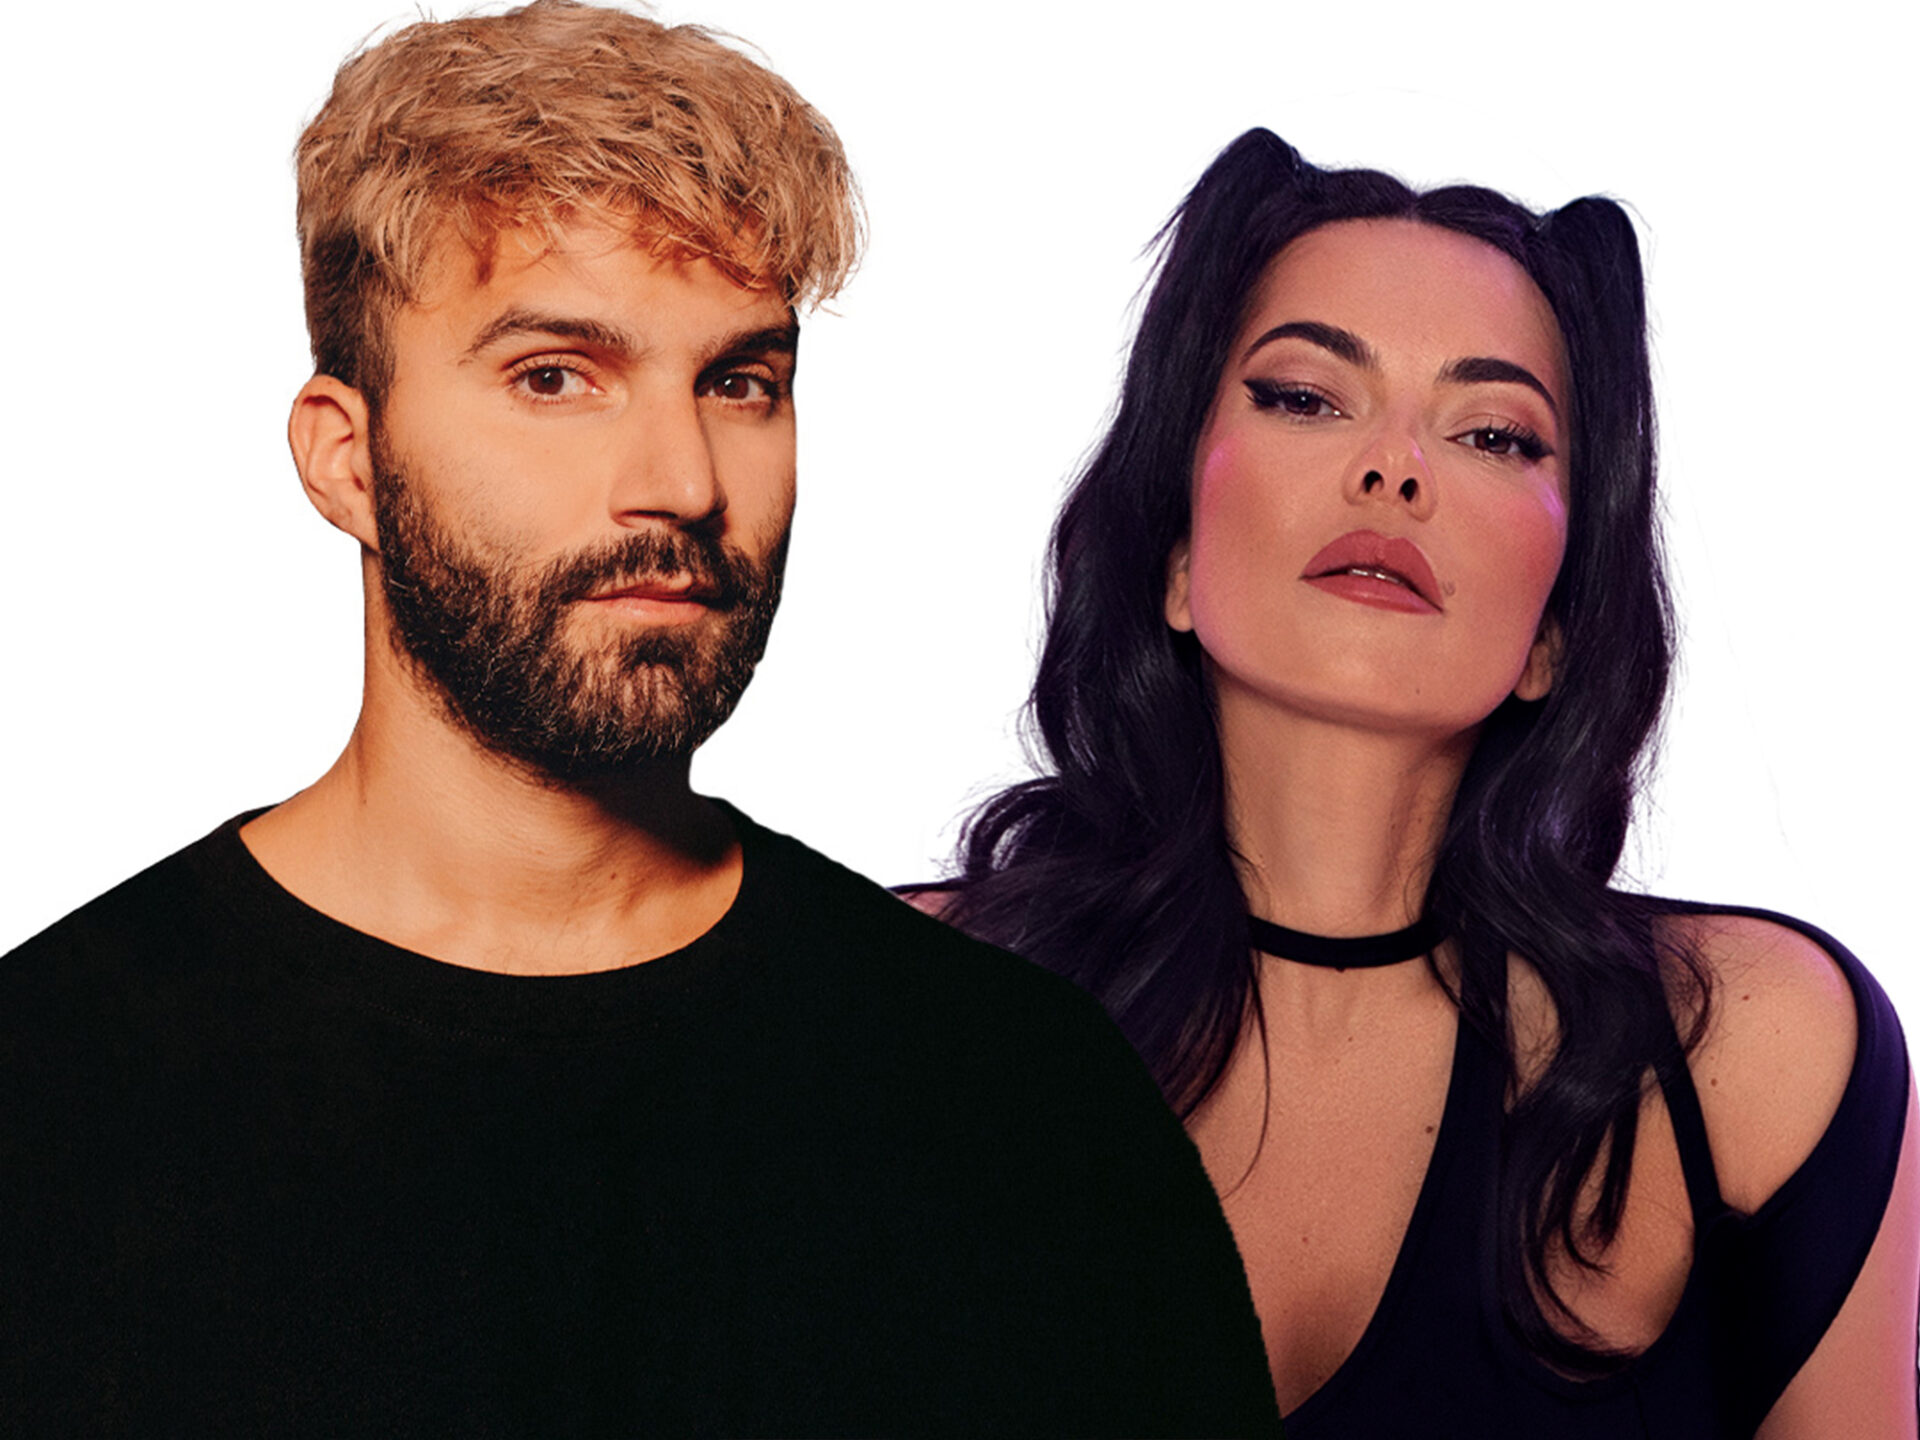 INNA, R3HAB & Sash! Collide in 'Rock My Body': A Dynamic Fusion of Dance-Pop and Electro House